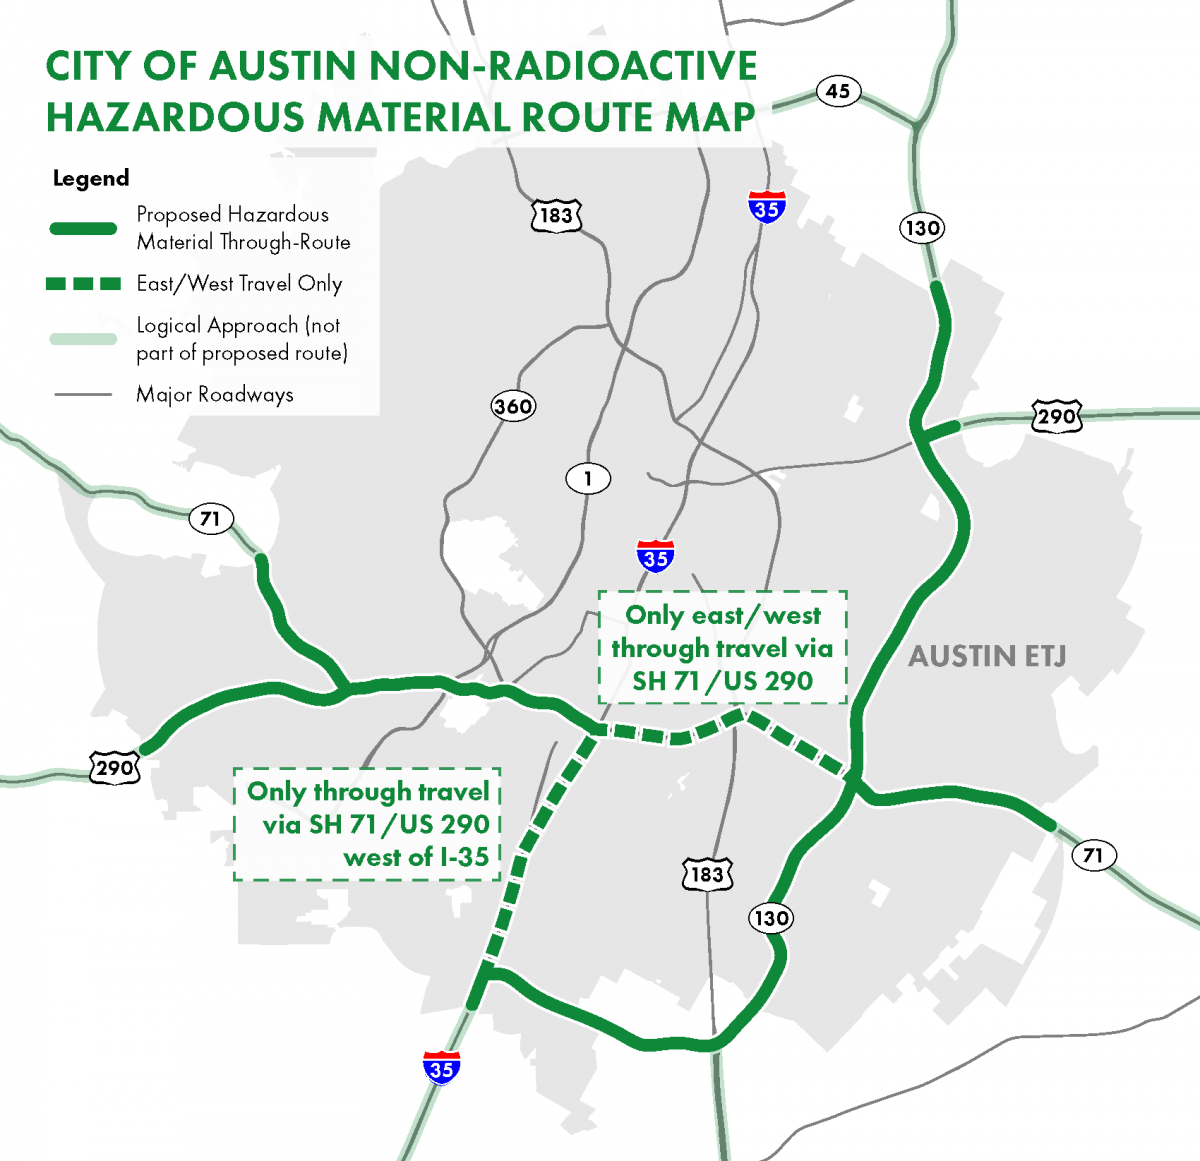 Map of the proposed route for non-radioactive hazardous materials for Austin.